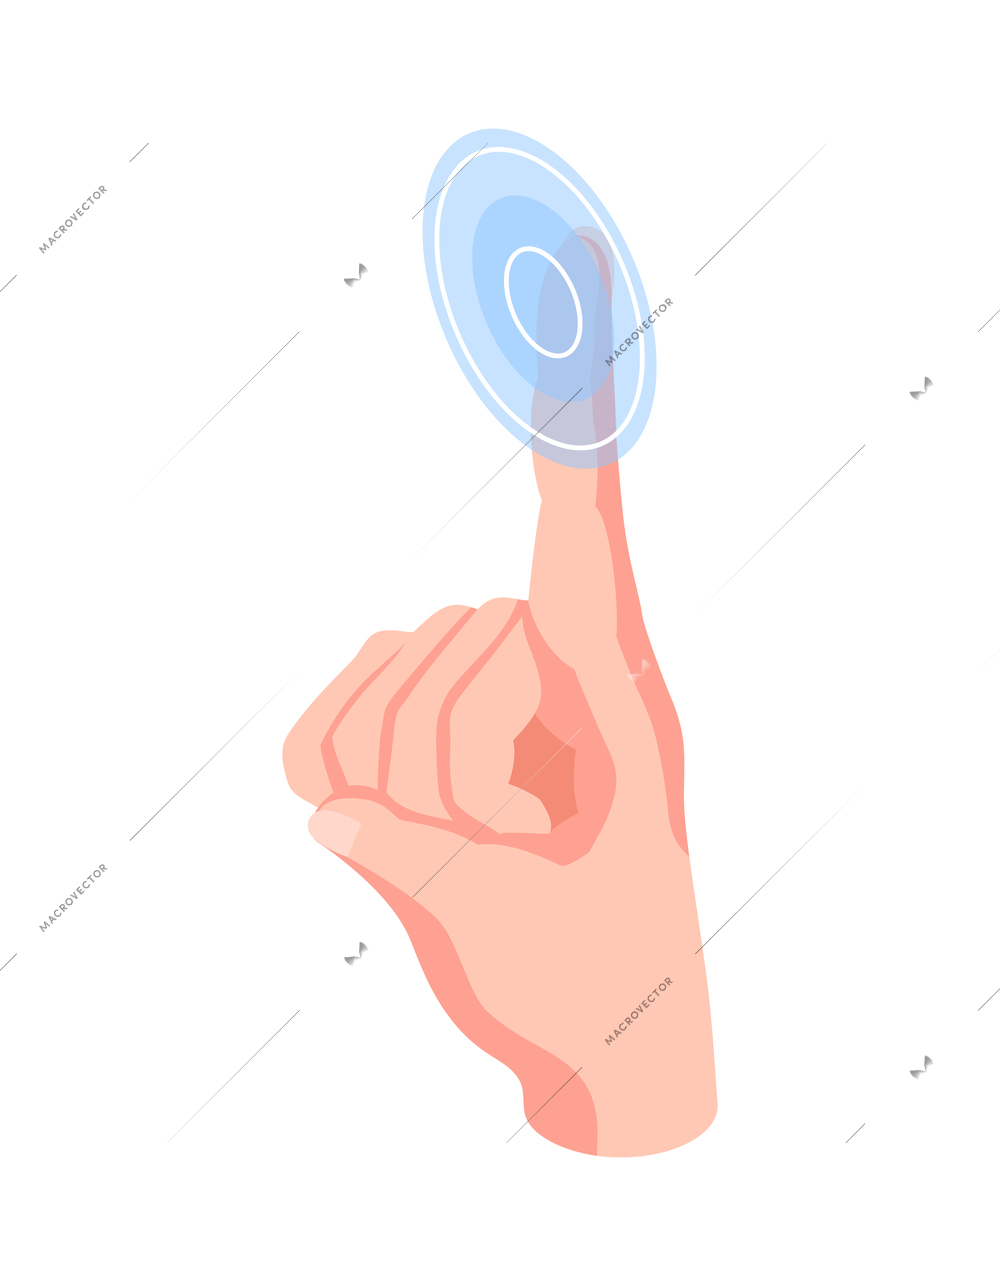 Isometric biometric identification icon with fingerprint being scanned 3d vector illustration